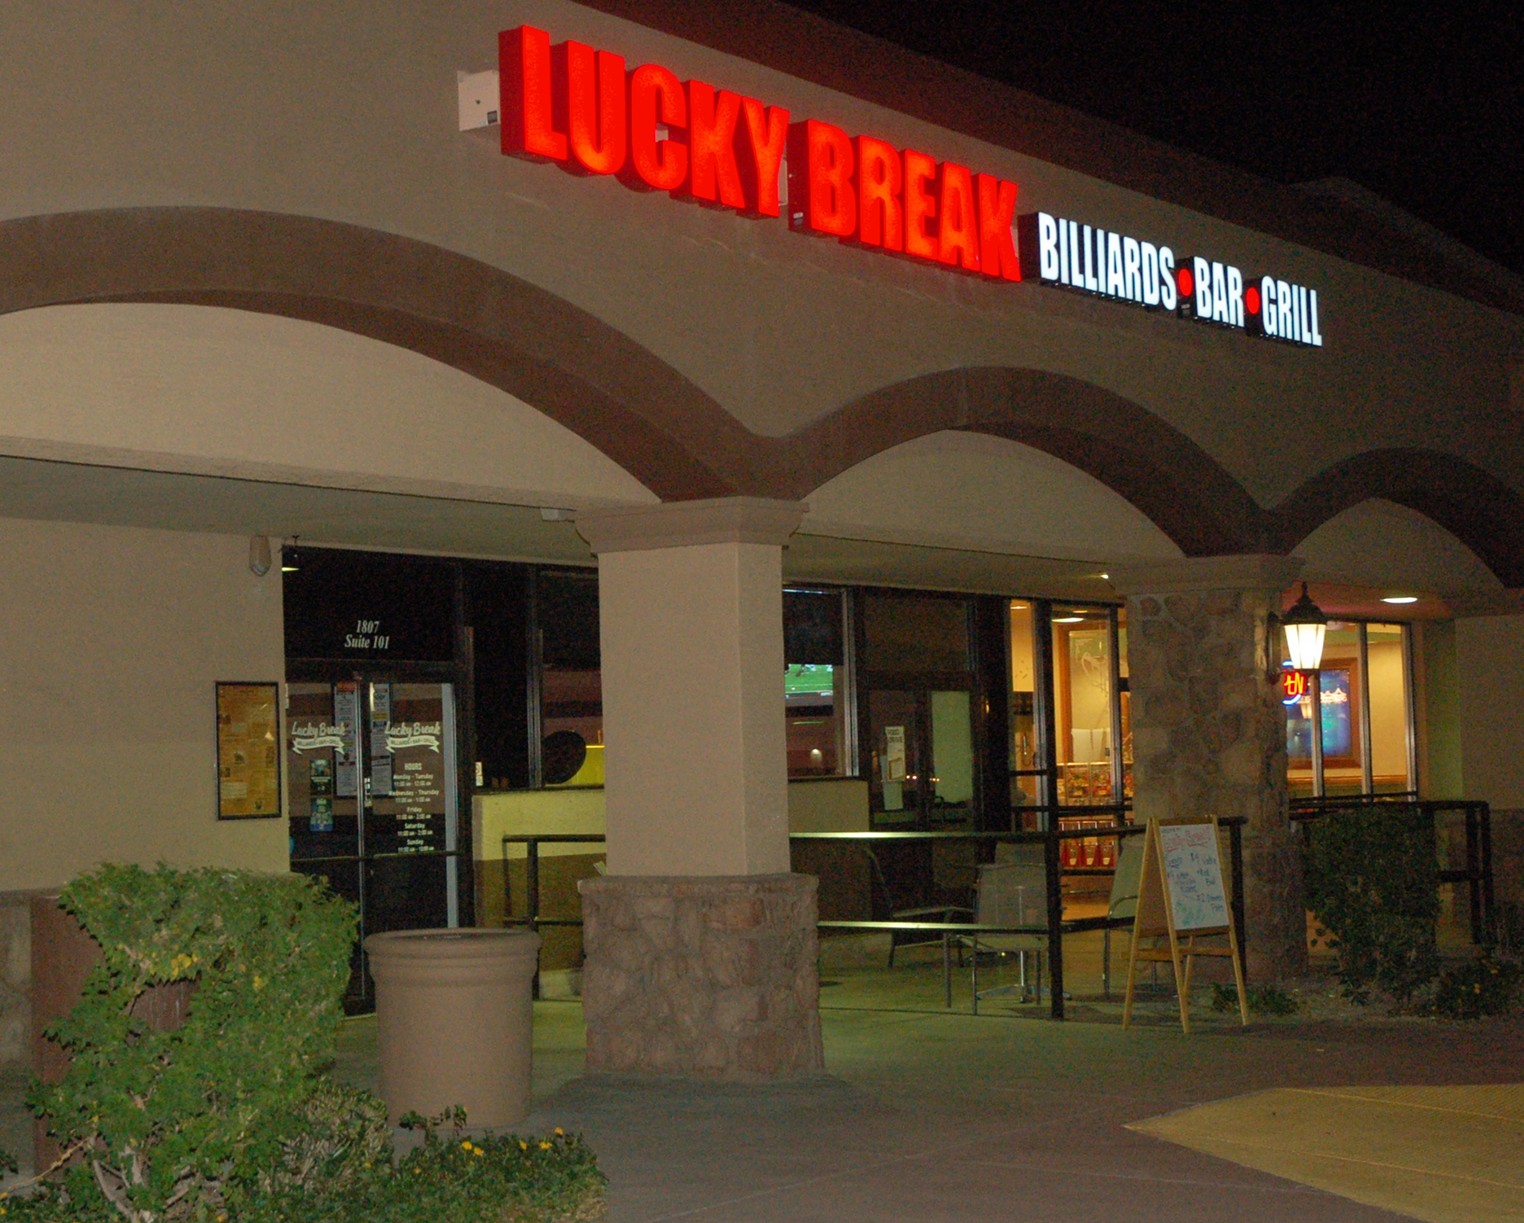 Best Sports Bar, Tempe 2013 Lucky Break Bars and Clubs Phoenix image